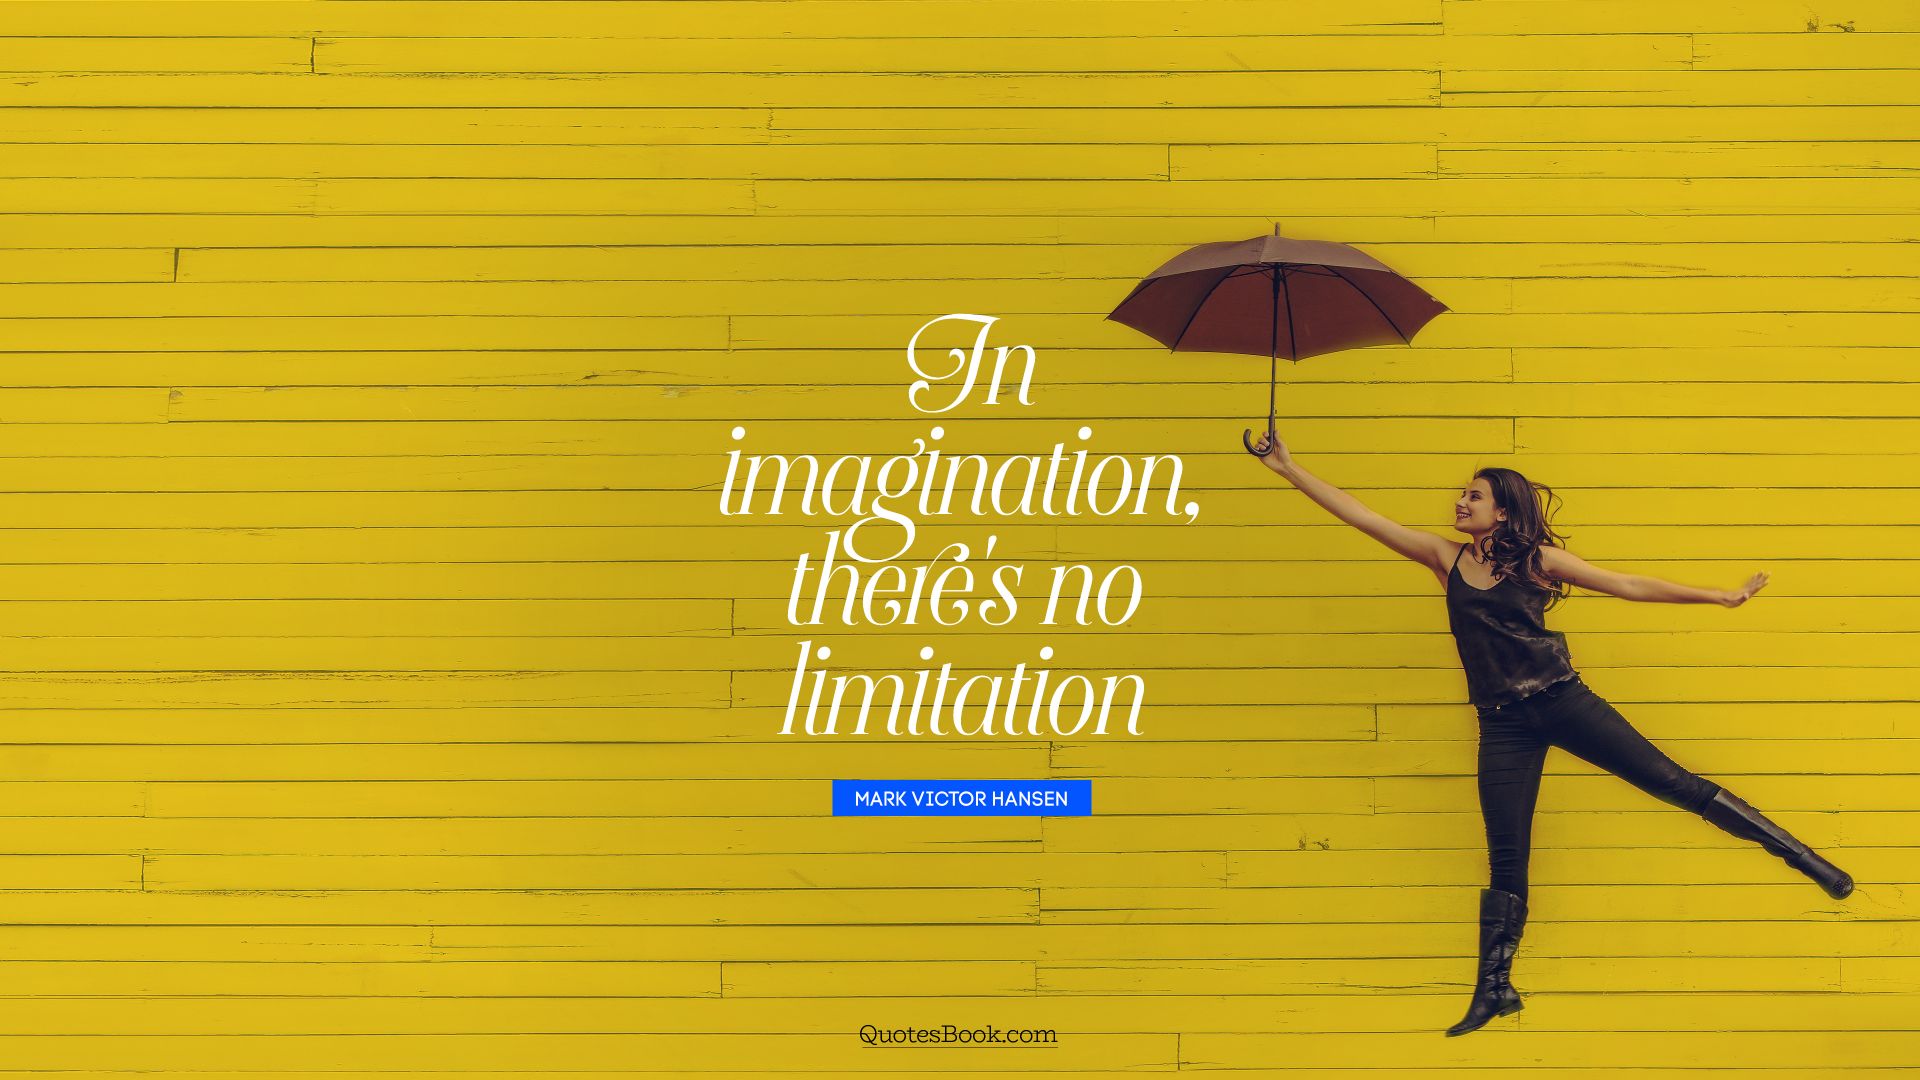 In imagination, there's no limitation. - Quote by Mark Victor Hansen